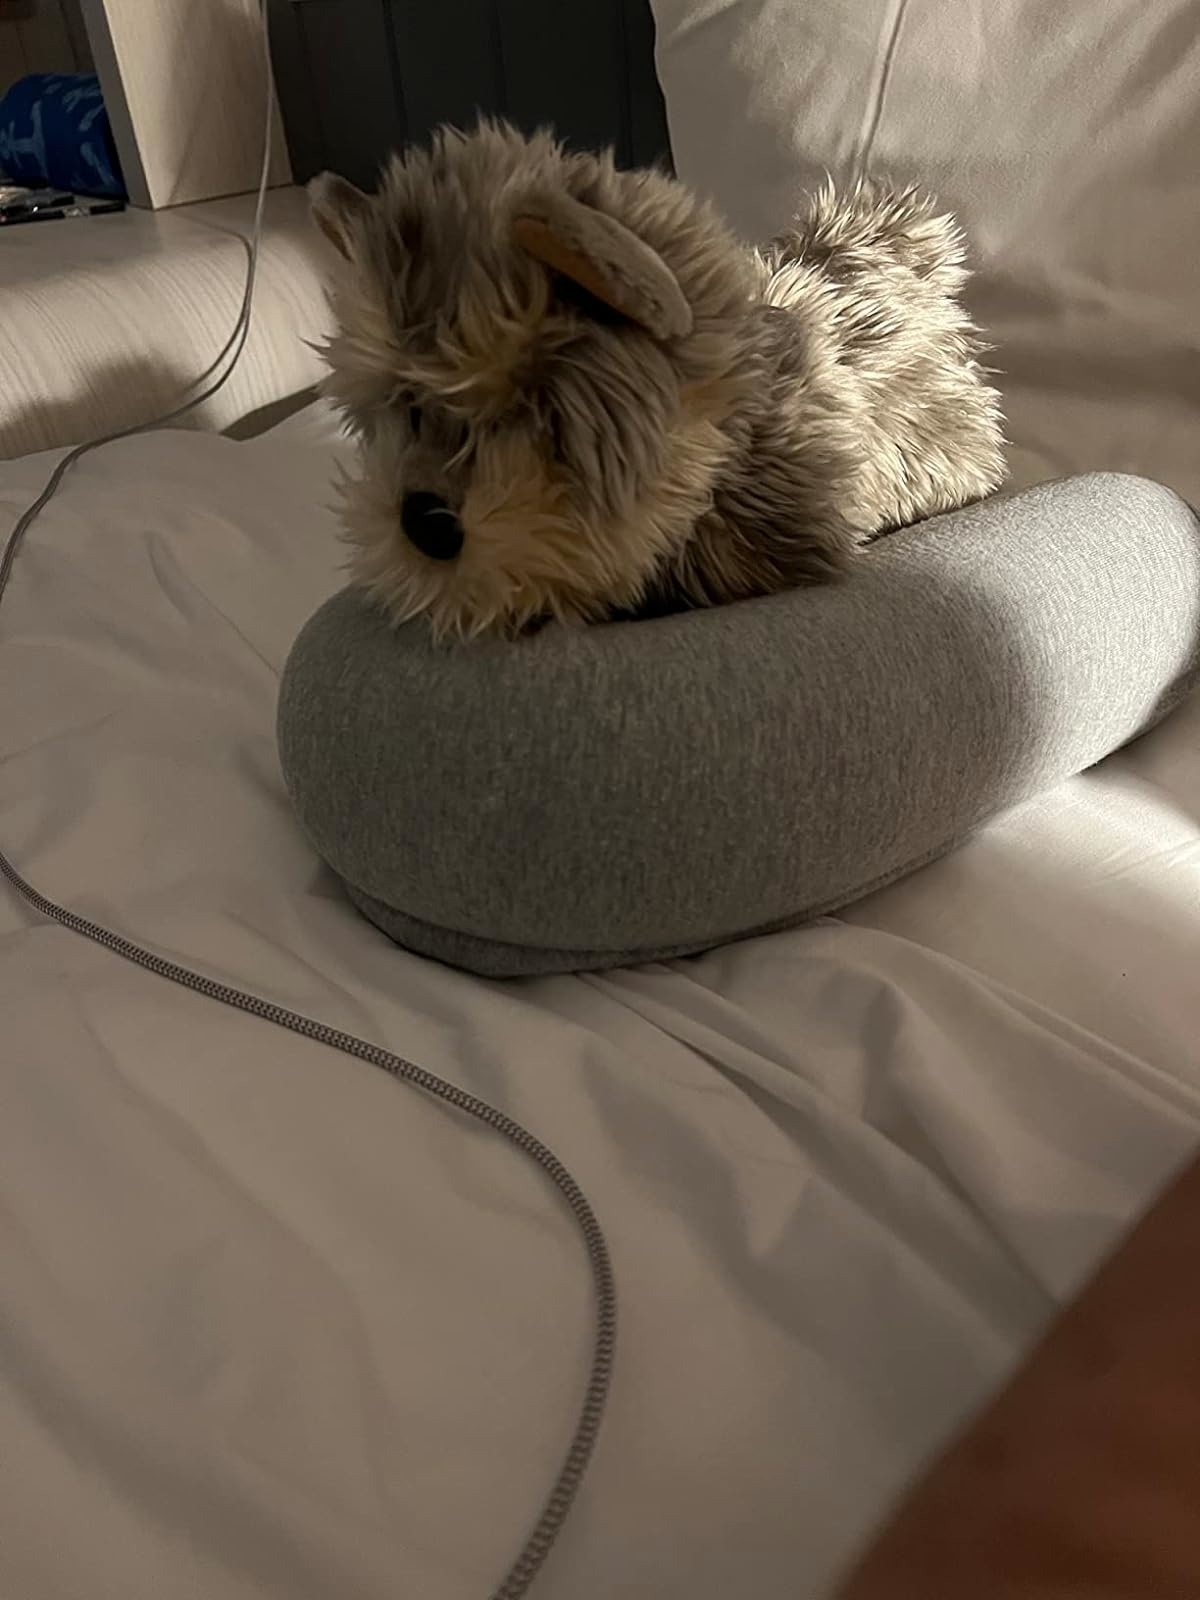 Reviewer image of the pillow around their dog